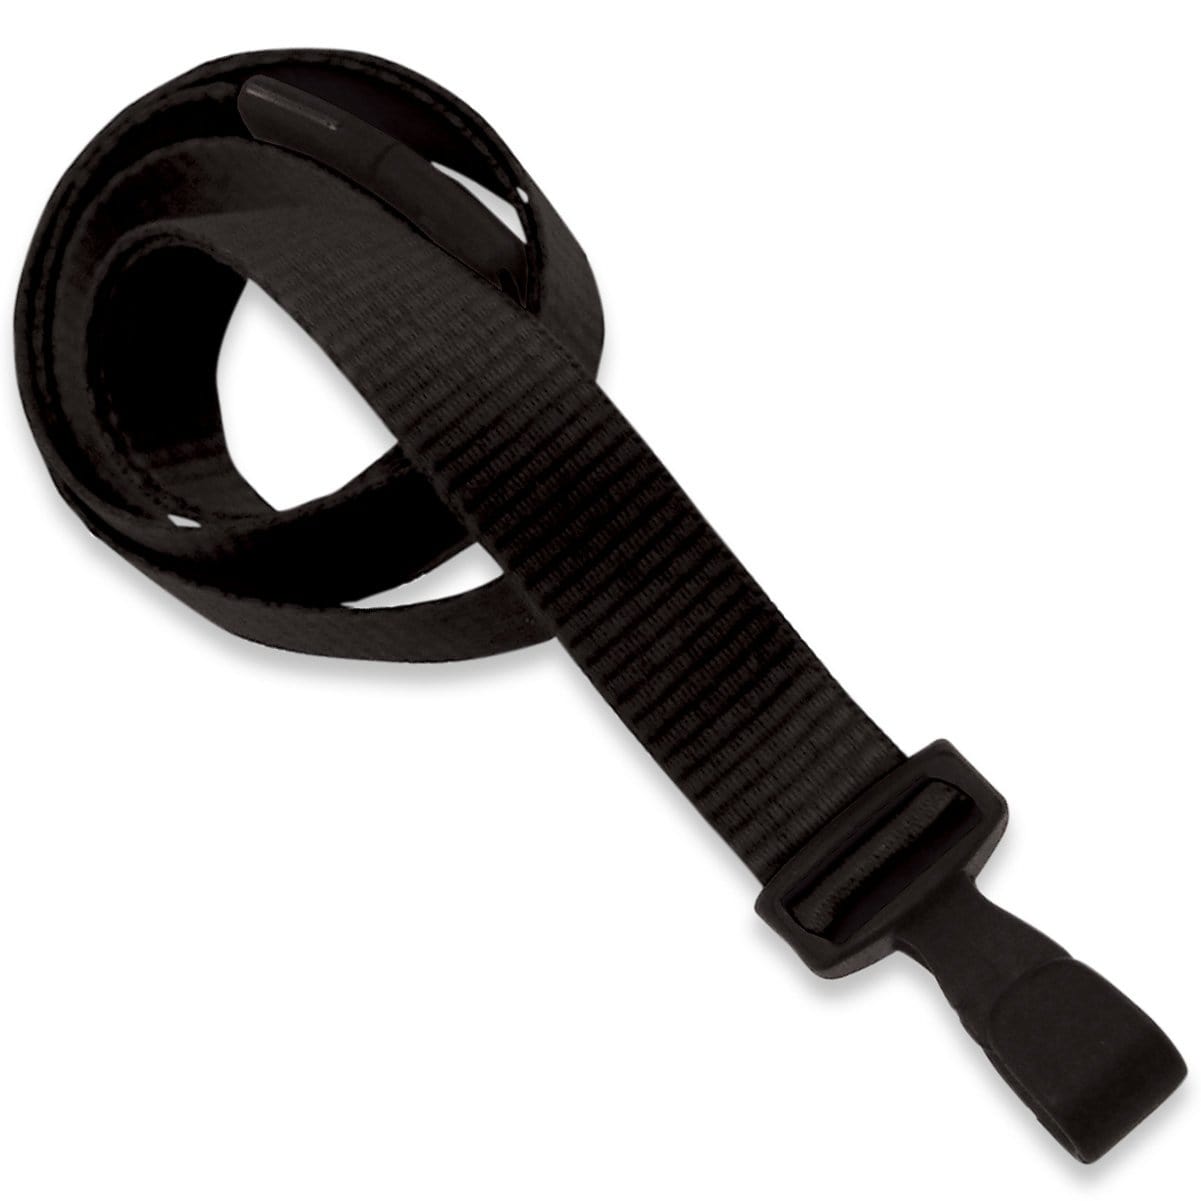 Black Antimicrobial 5/8 Inch Lanyard with Breakaway Clasp & No-Twist Plastic Hook (2136-340X) 2136-3405